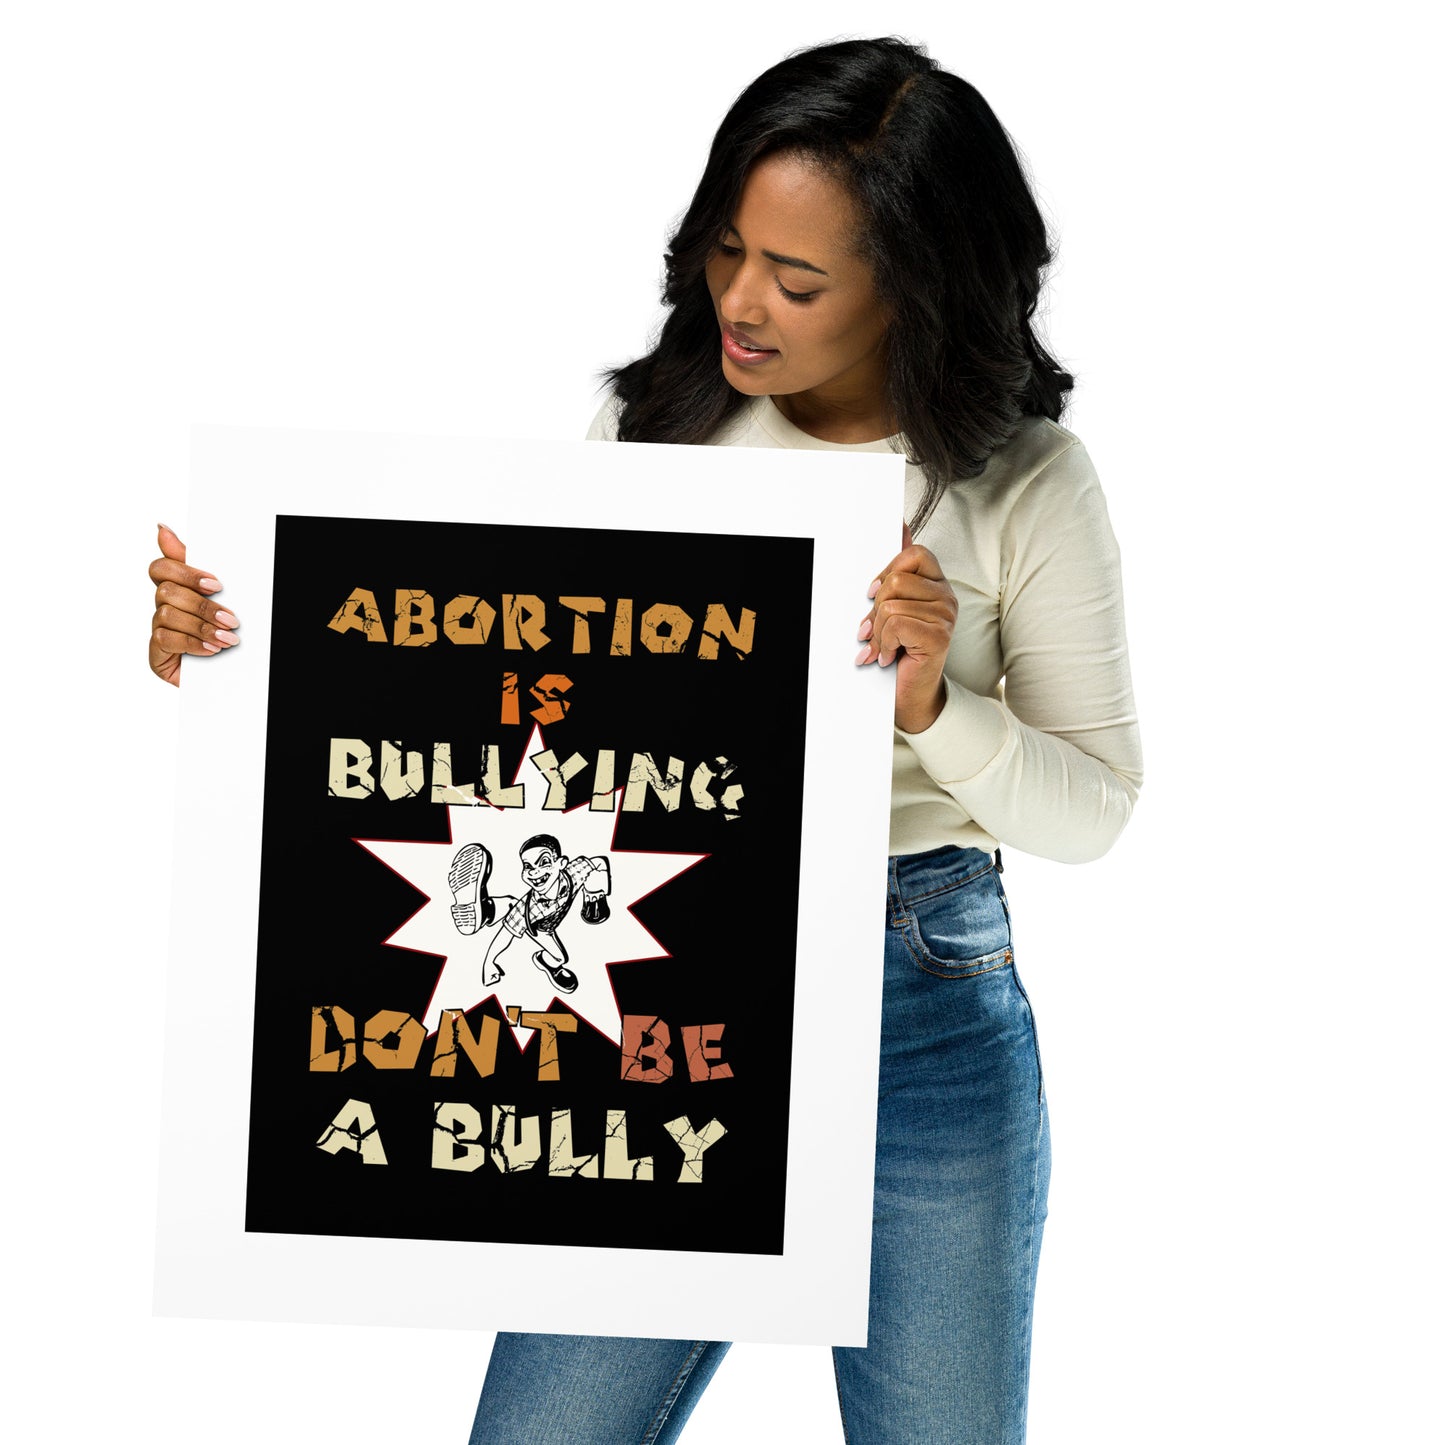 A001 Art Print - Museum Quality Giclée Print Featuring Mean Guy Graphic with text “Abortion is Bullying. Don’t be a Bully.”